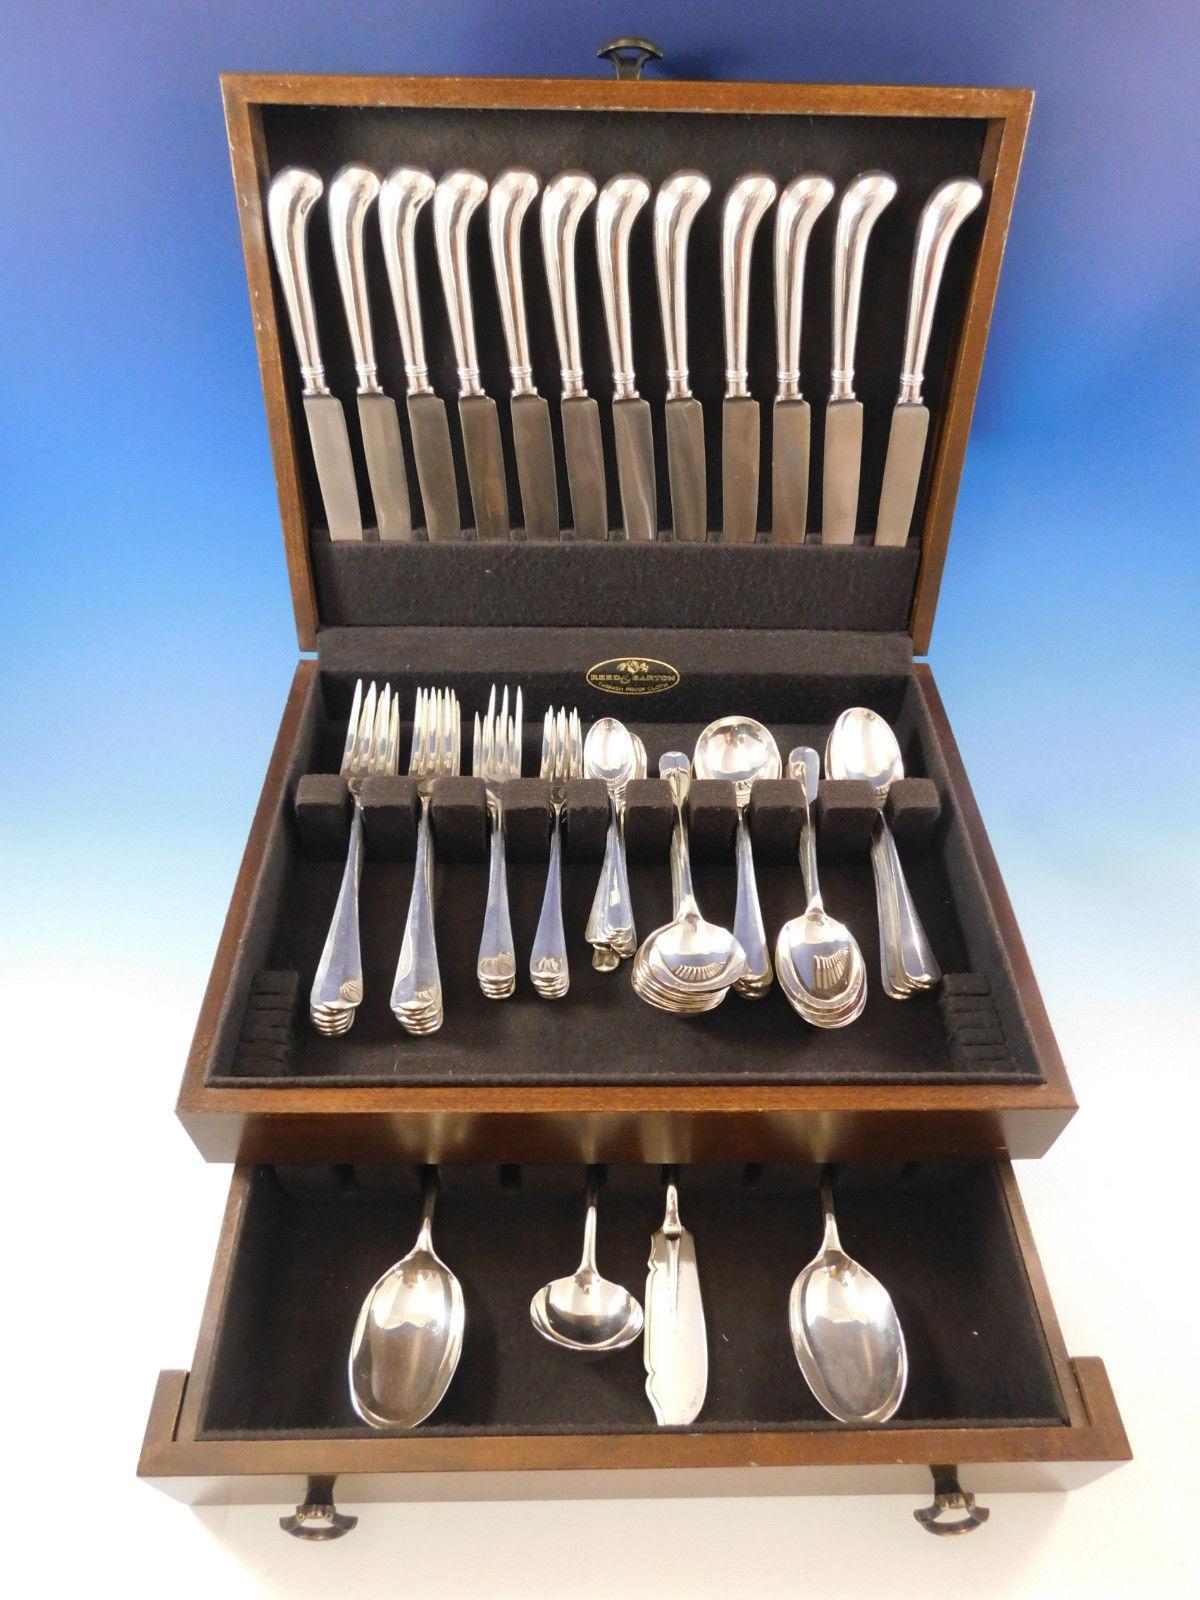 Superb Dinner Size Rat Tail by White & Sons, Sheffield England sterling silver Flatware set, 76 pieces. This set includes:

12 Dinner Size Knives with wonderful pistol-grip handles, 9 5/8